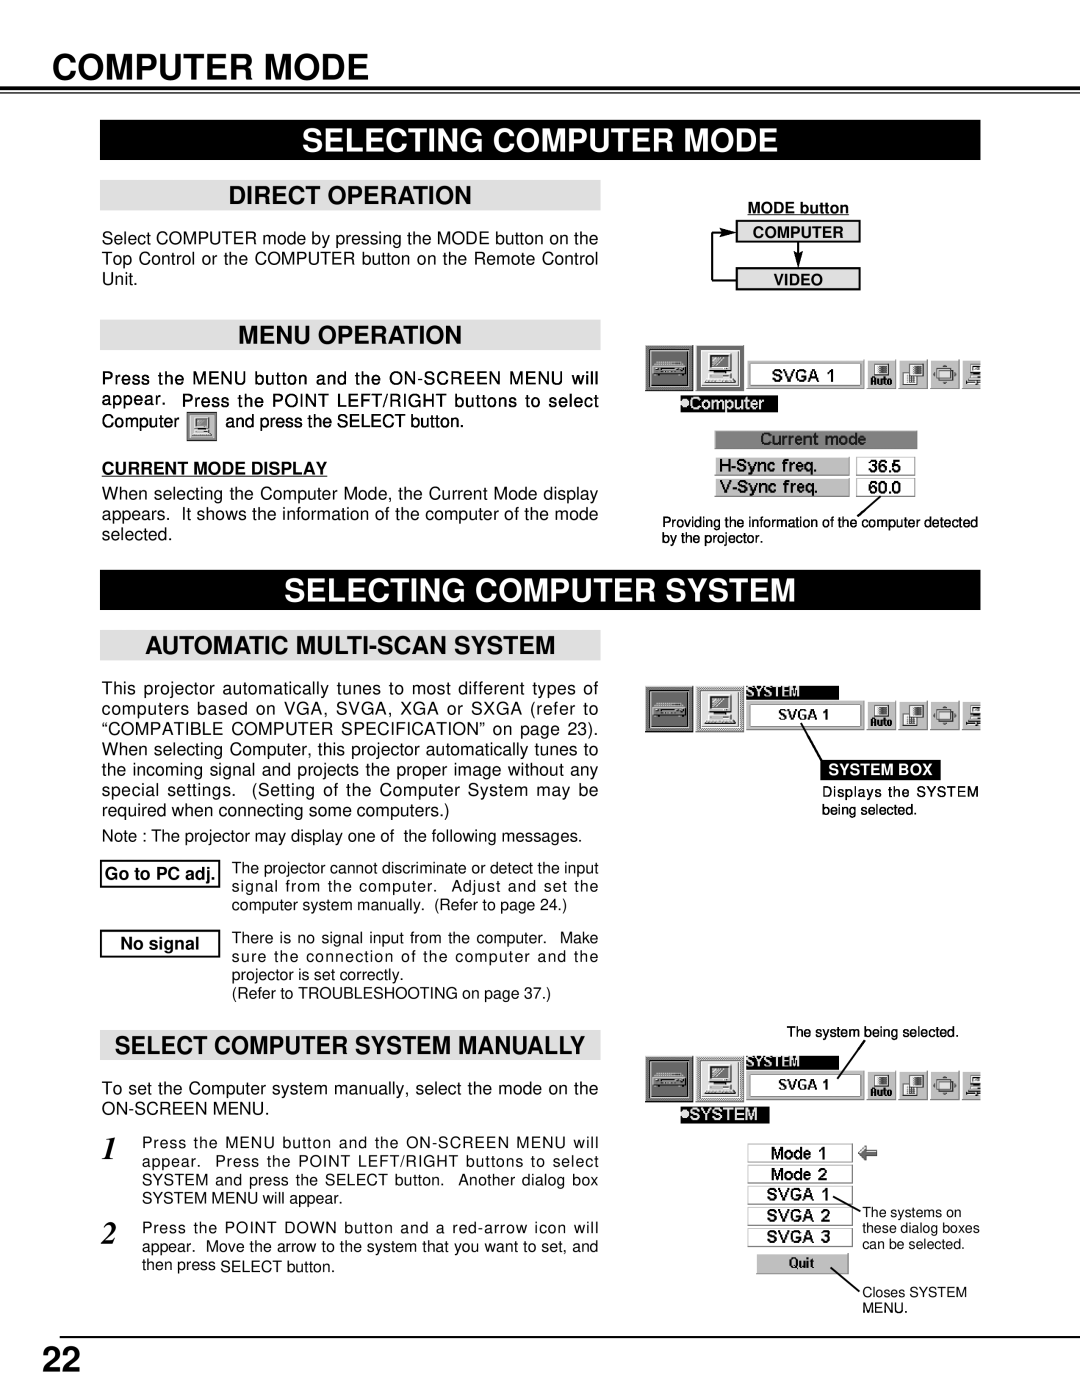 Canon 5100 Selecting Computer Mode, Selecting Computer System, Direct Operation, Menu Operation, Current Mode Display 